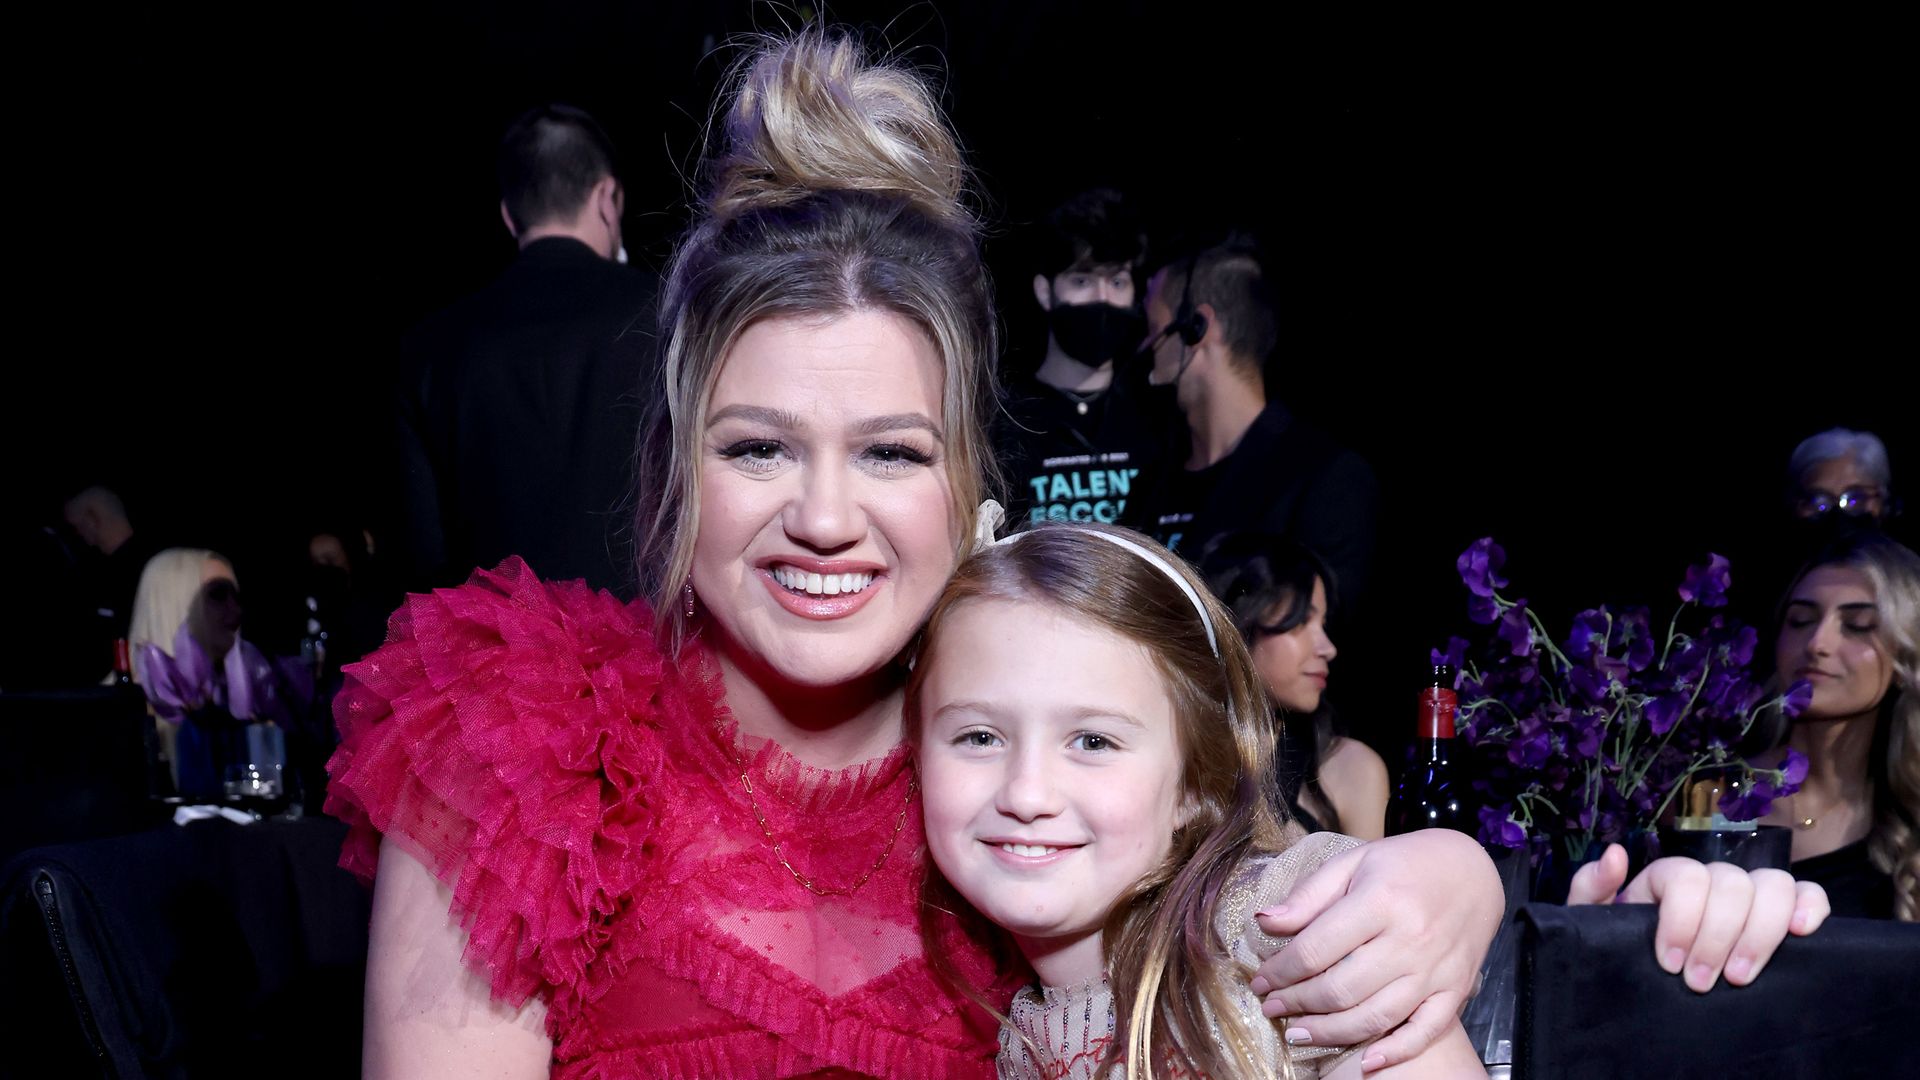 Kelly Clarkson and River Rose Blackstock attend the 2022 People's Choice Awards held at the Barker Hangar on December 6, 2022 in Santa Monica, California